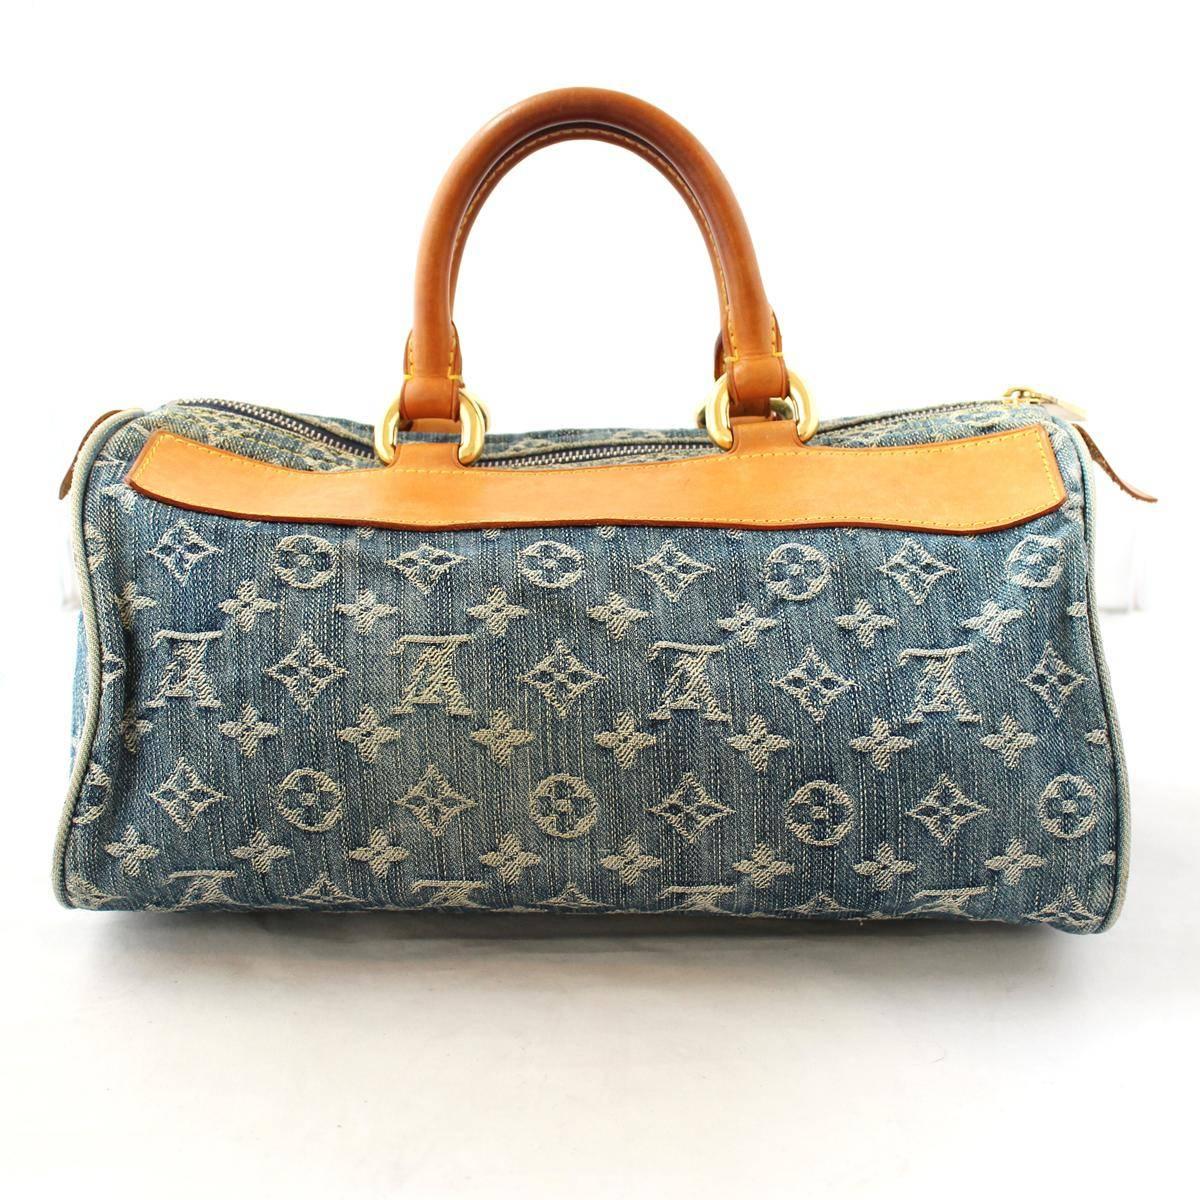 Funny and different Louis Vuitton bag
Speedy 30 bag
2006 Marc Jacobs special edition
TLeather
Denim textile with LV Monogram
Three external pockets
Zip closure
Internal pocket
Cm 30 x 15 x 16  (11.8 x 5.9 x 6.2 inches)
Worldwide express shipping